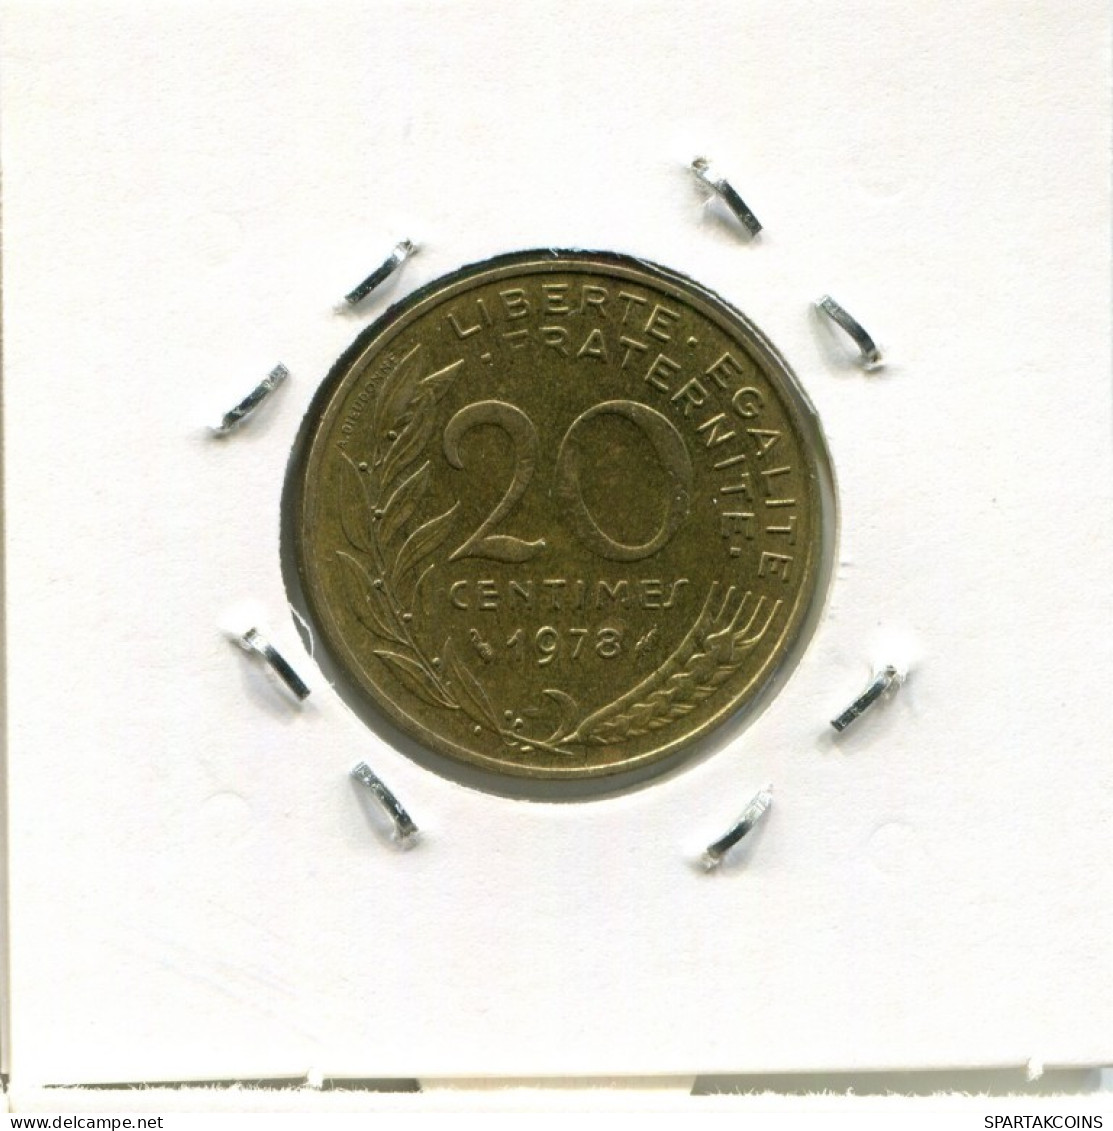 20 CENTIMES 1978 FRANCE Coin French Coin #AN890.U.A - 20 Centimes